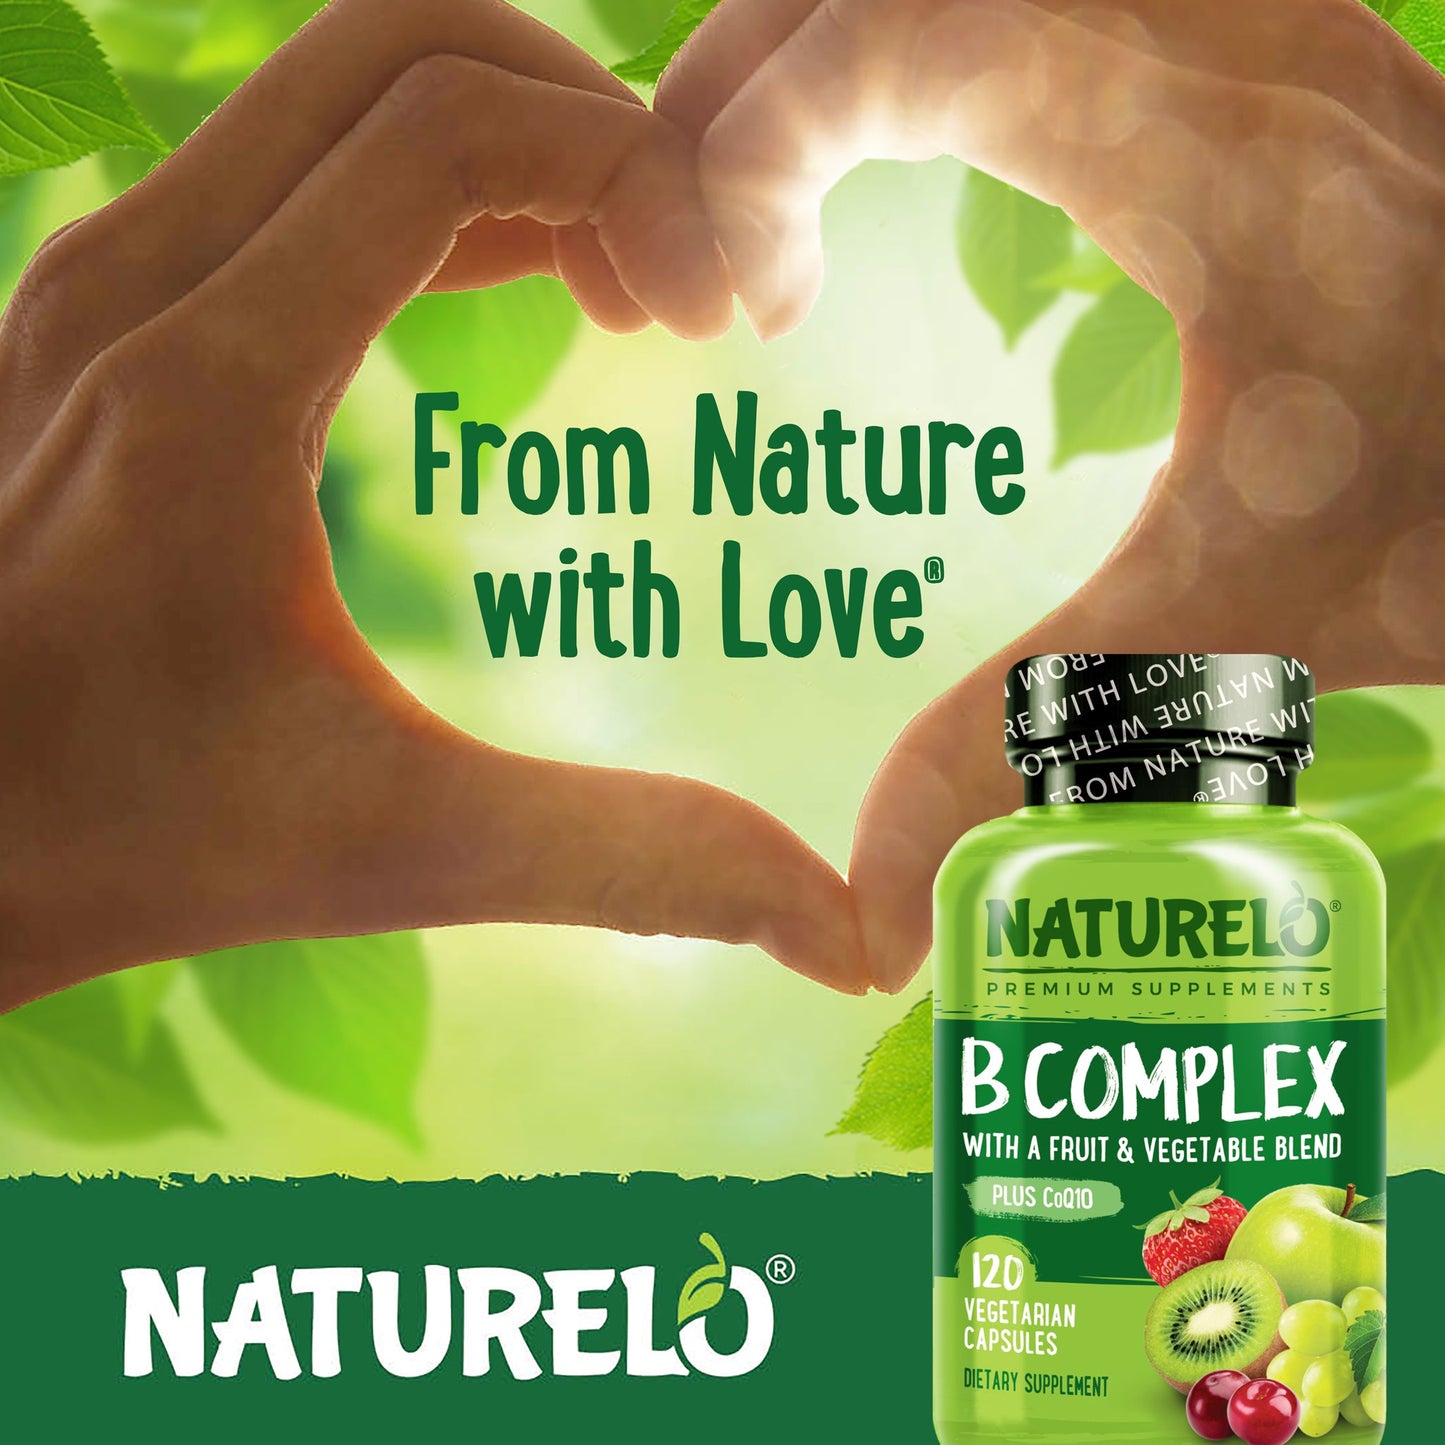 B Complex Supplements with CoQ10